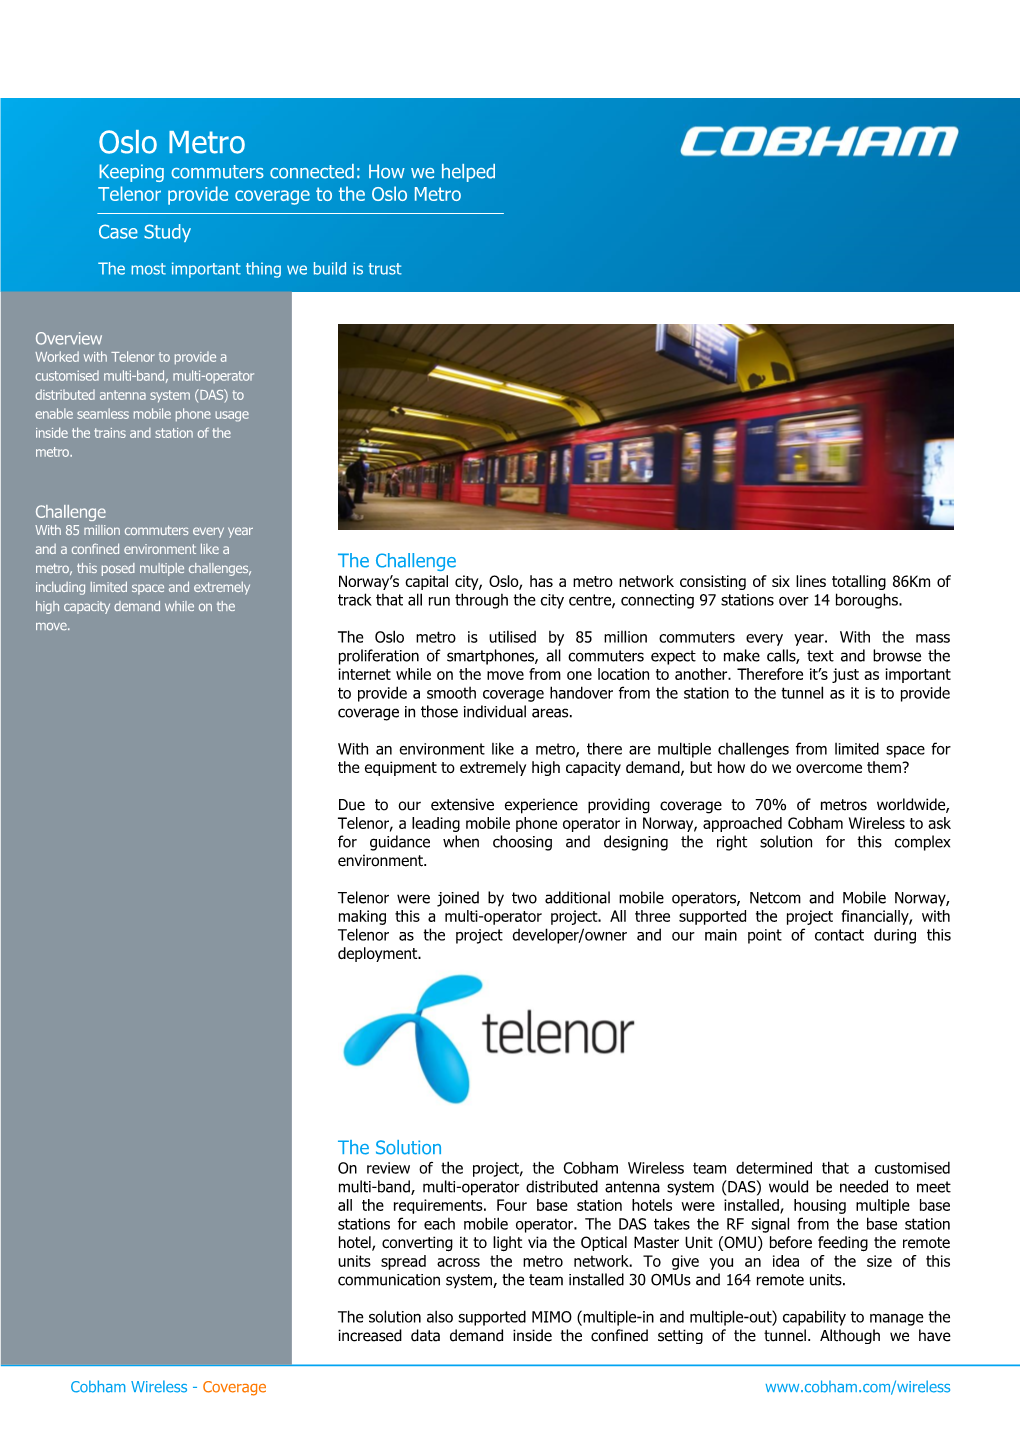 Oslo Metro Keeping Commuters Connected: How We Helped Telenor Provide Coverage to the Oslo Metro Case Study